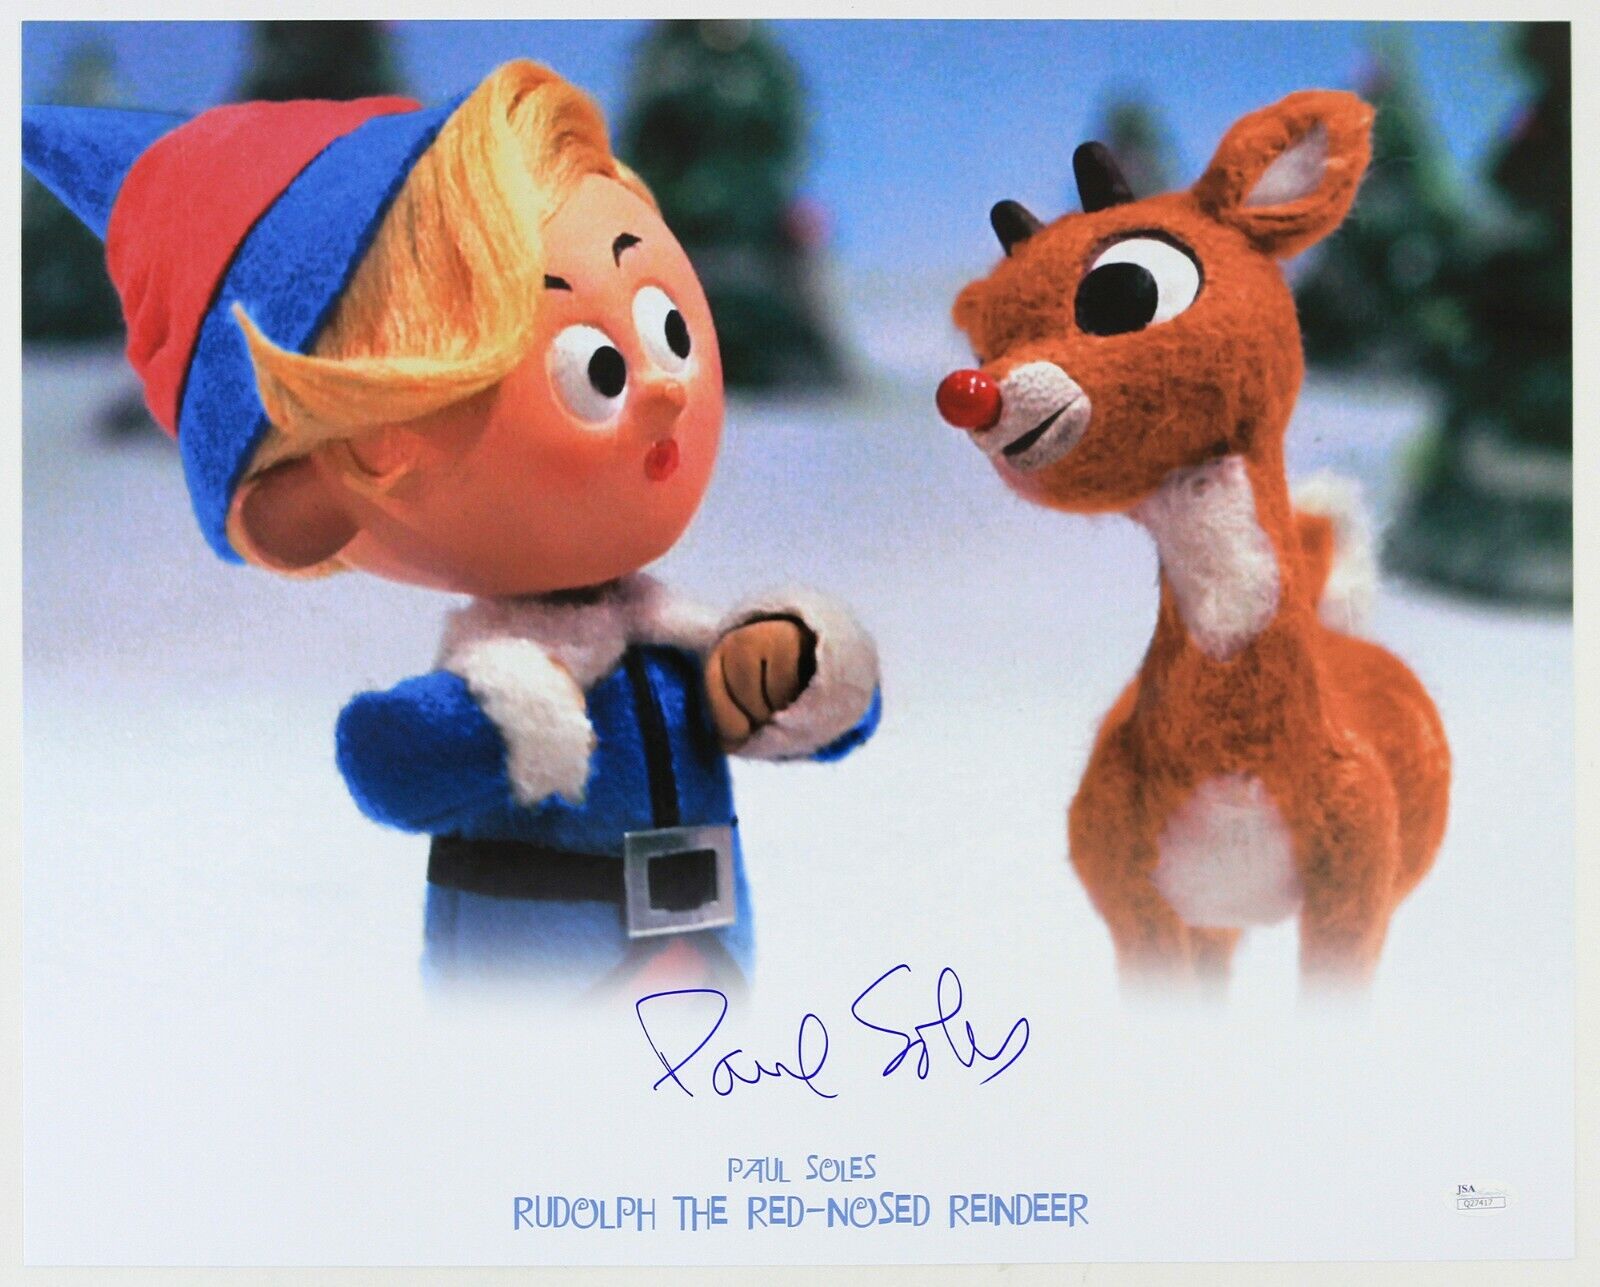 1964 Paul Soles Rudolph the Red Nosed Reindeer Signed 16x20 Photo (JSA)